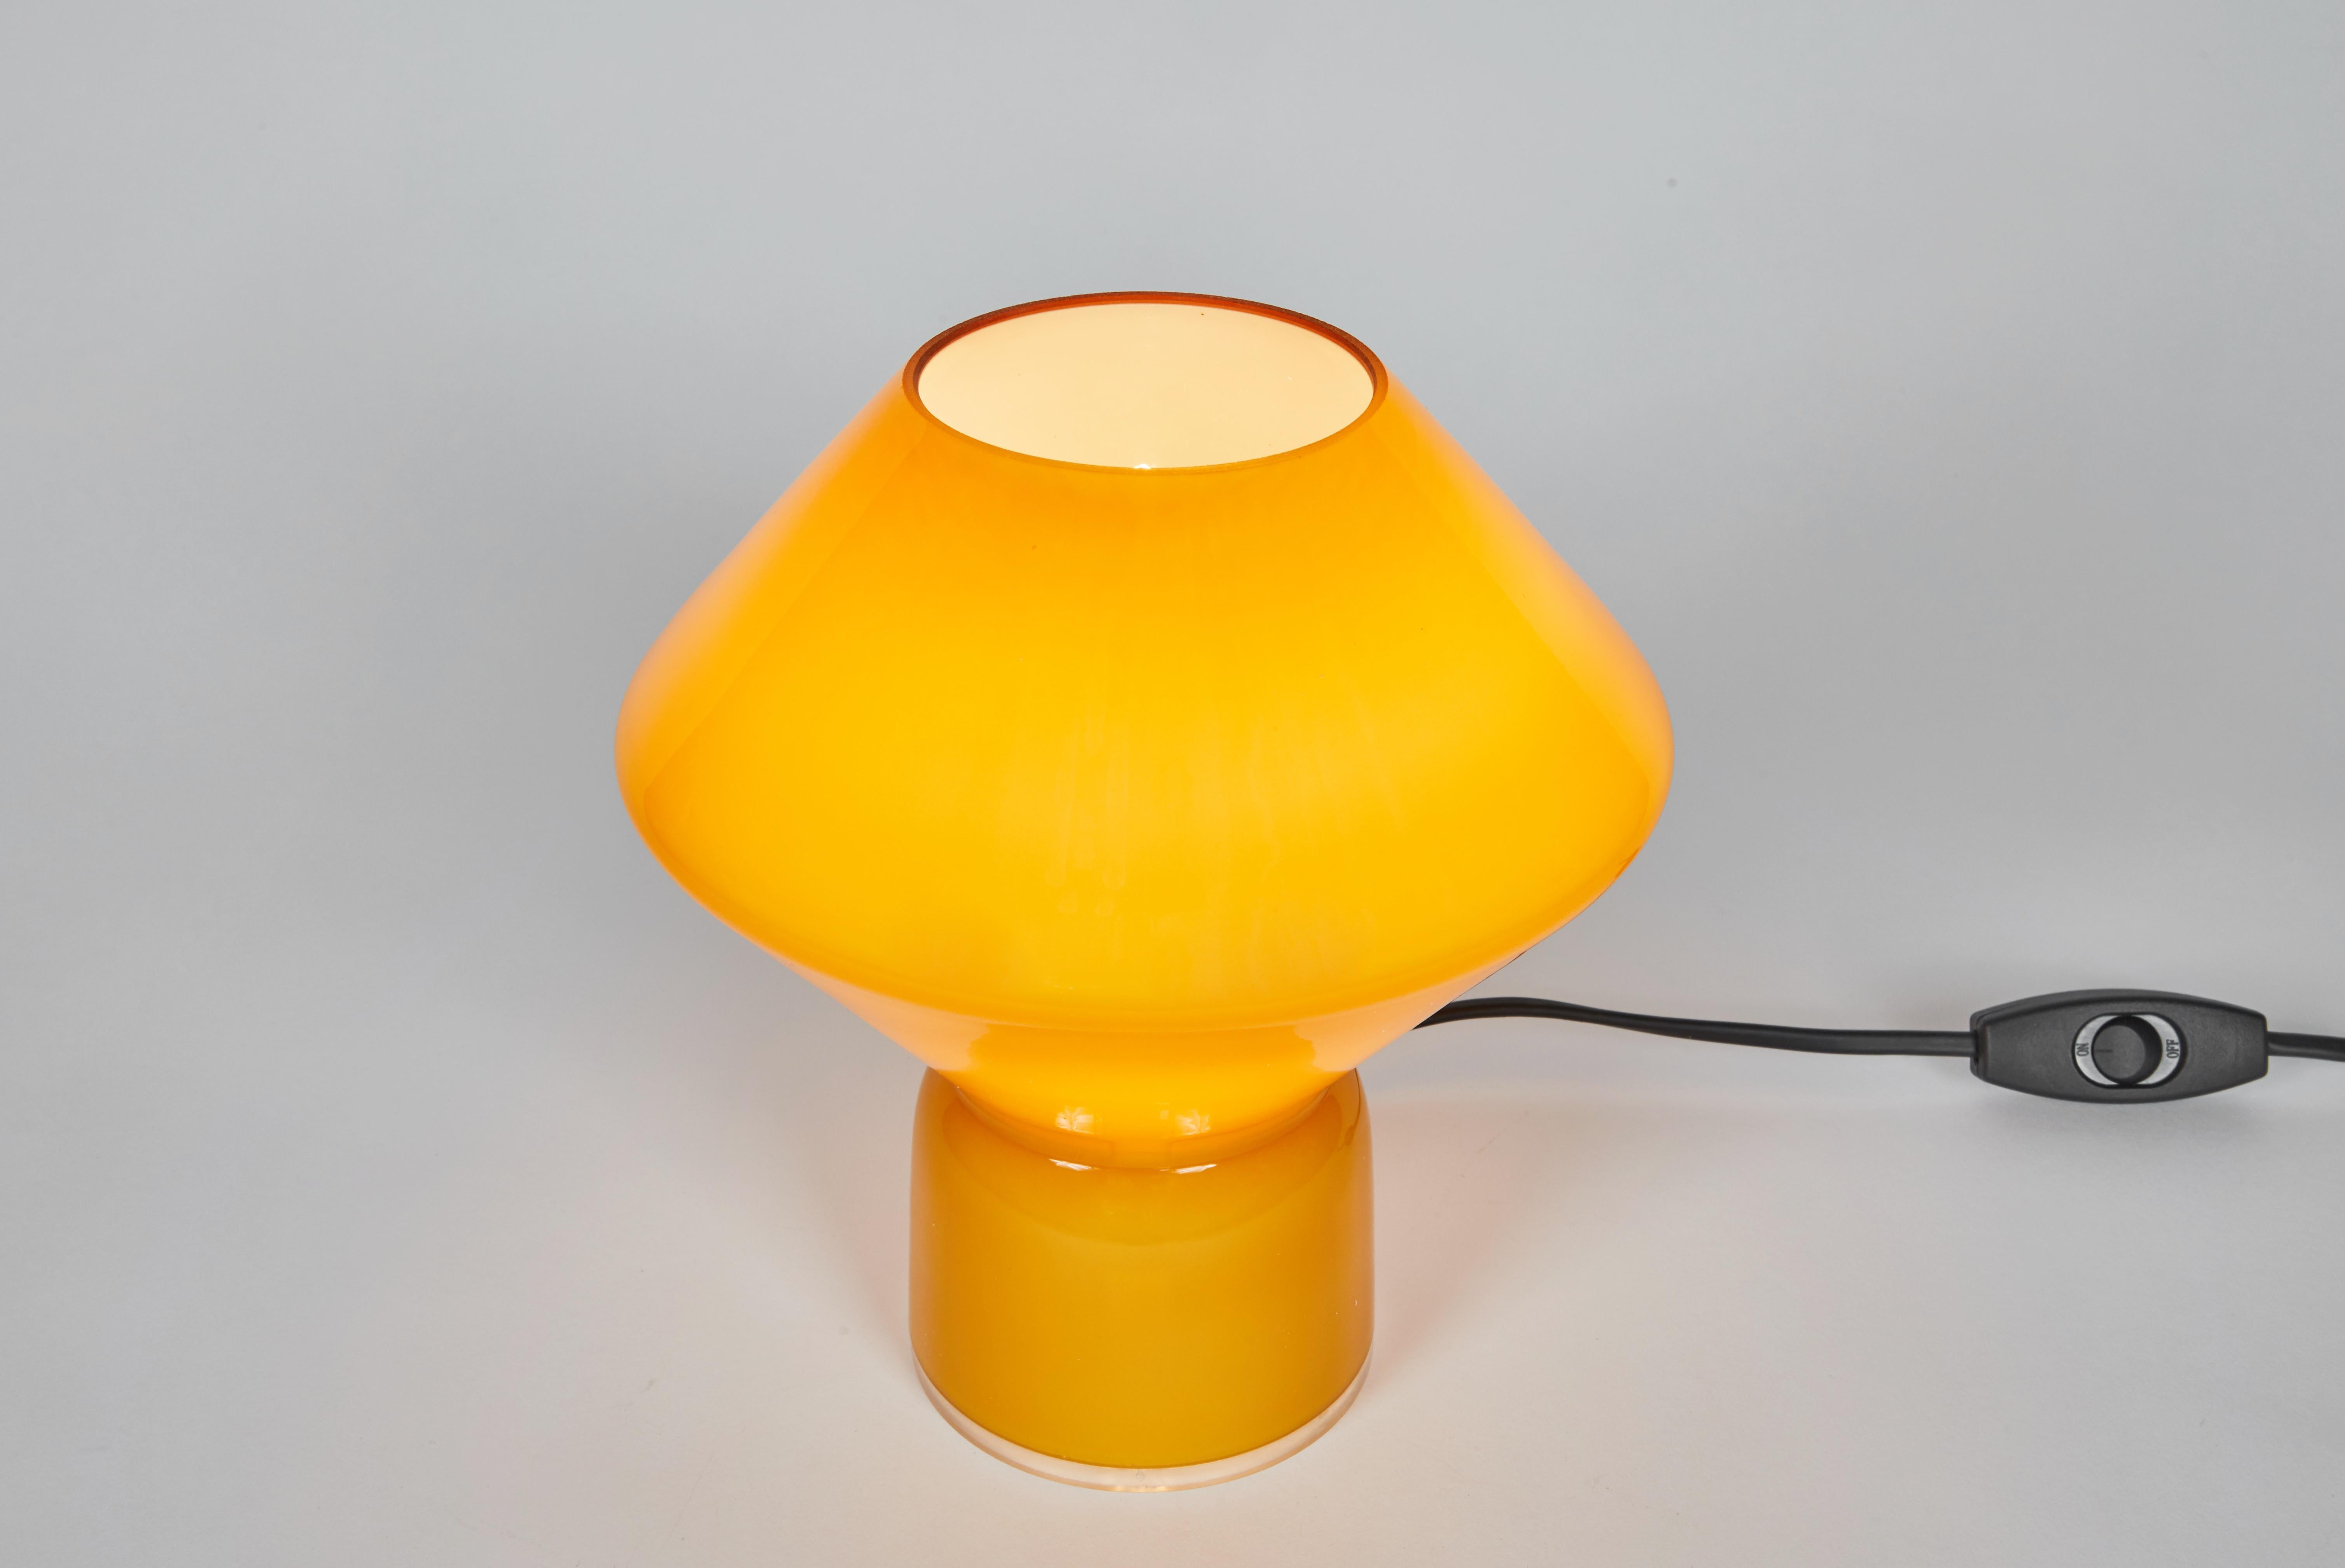 1980s Memphis Style 'Conica' Pale Yellow Glass Table Lamp for Artemide. Designed by Alessandro Mendini. Handcrafted in pale yellow Murano glass, this petite lamp is strongly associated with the 1980s Memphis style that characterized Artemide's now